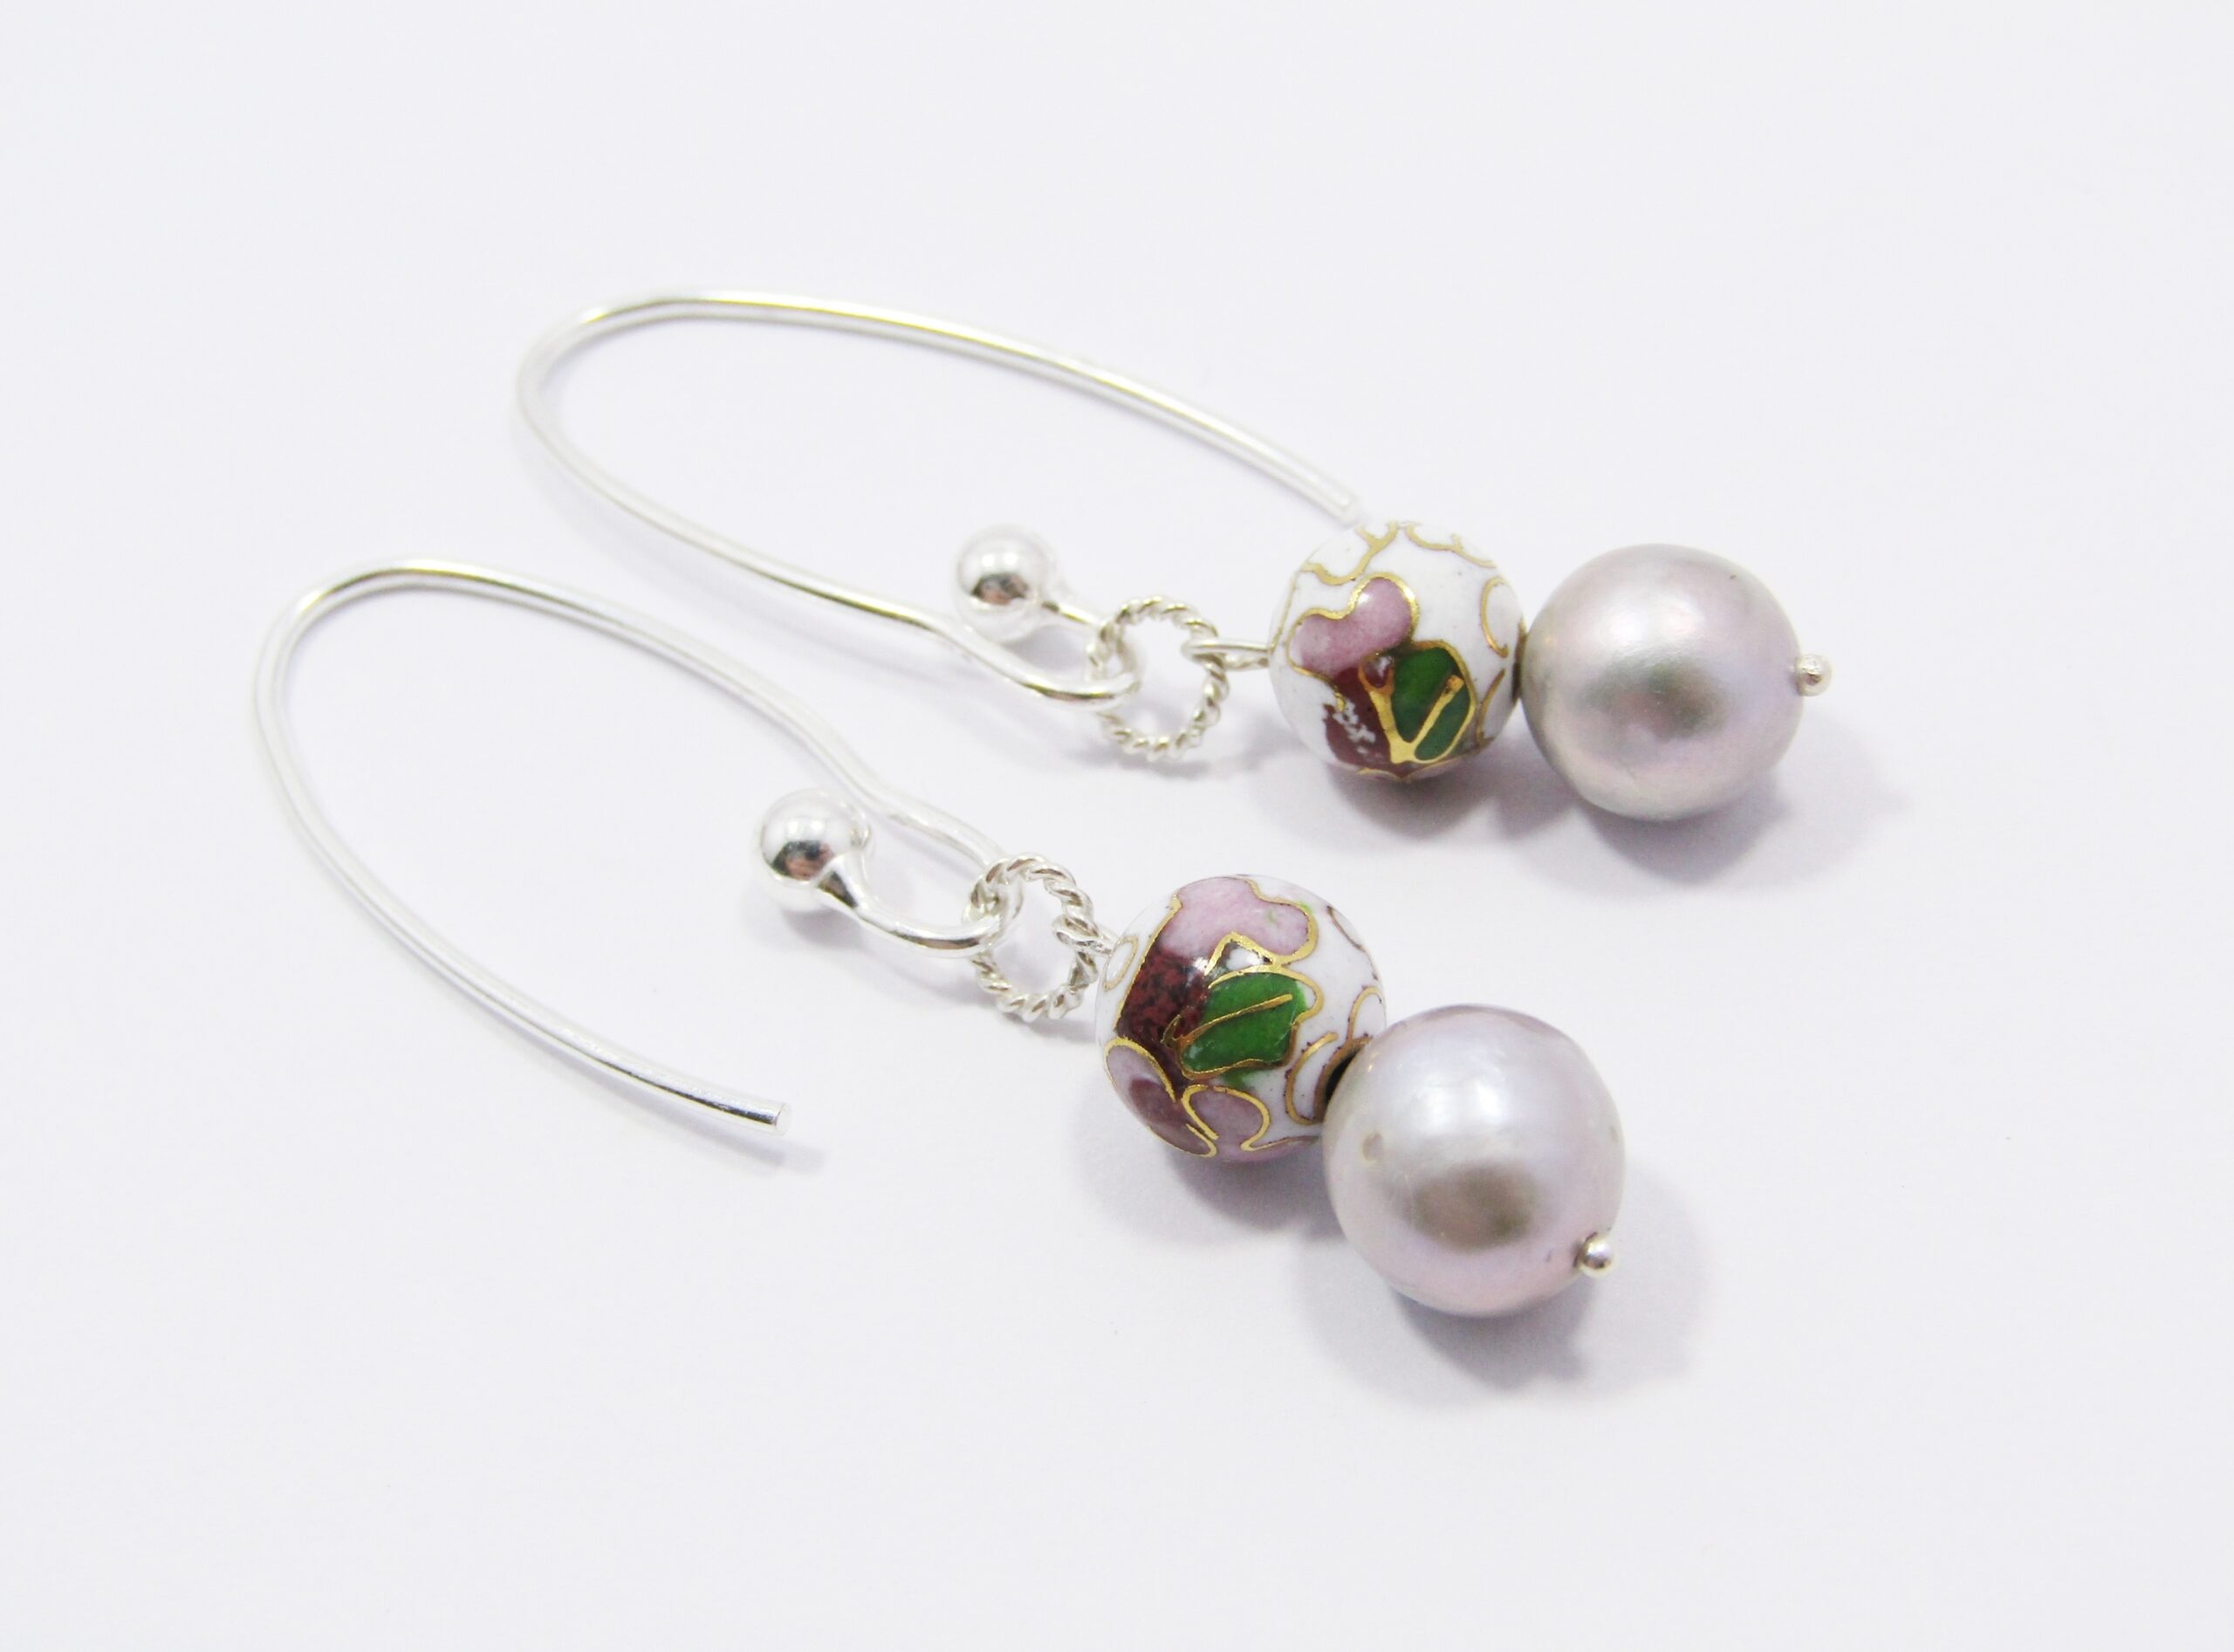 Pair of Dove Grey Fresh Water Pearls and Cloisonné Beads Dangling Earrings